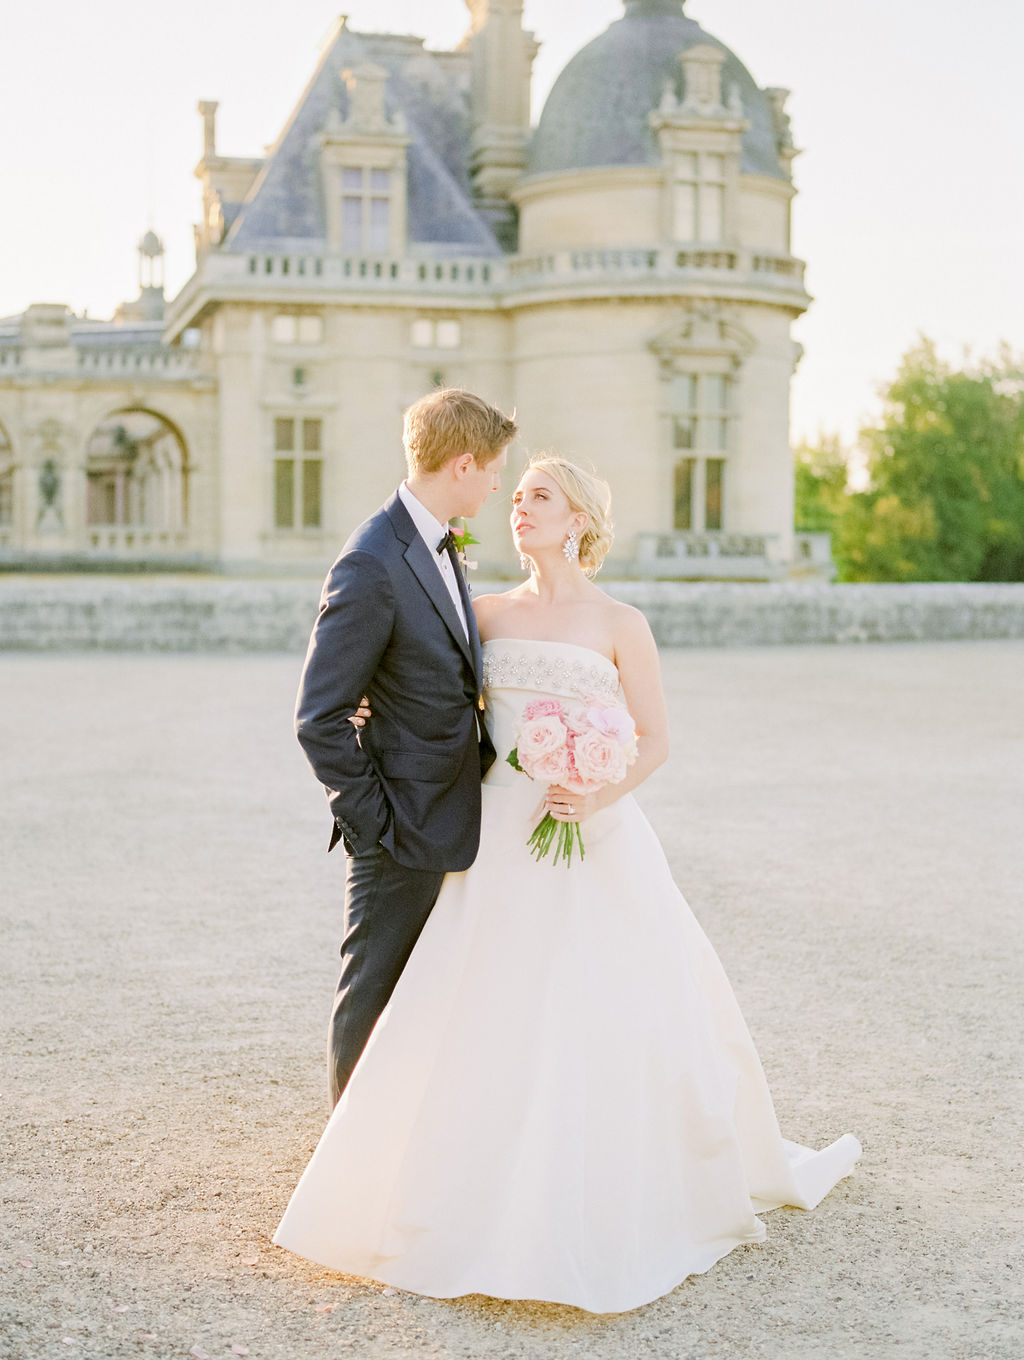 Bride and groom portrait at a French château wedding planned by Fête in France